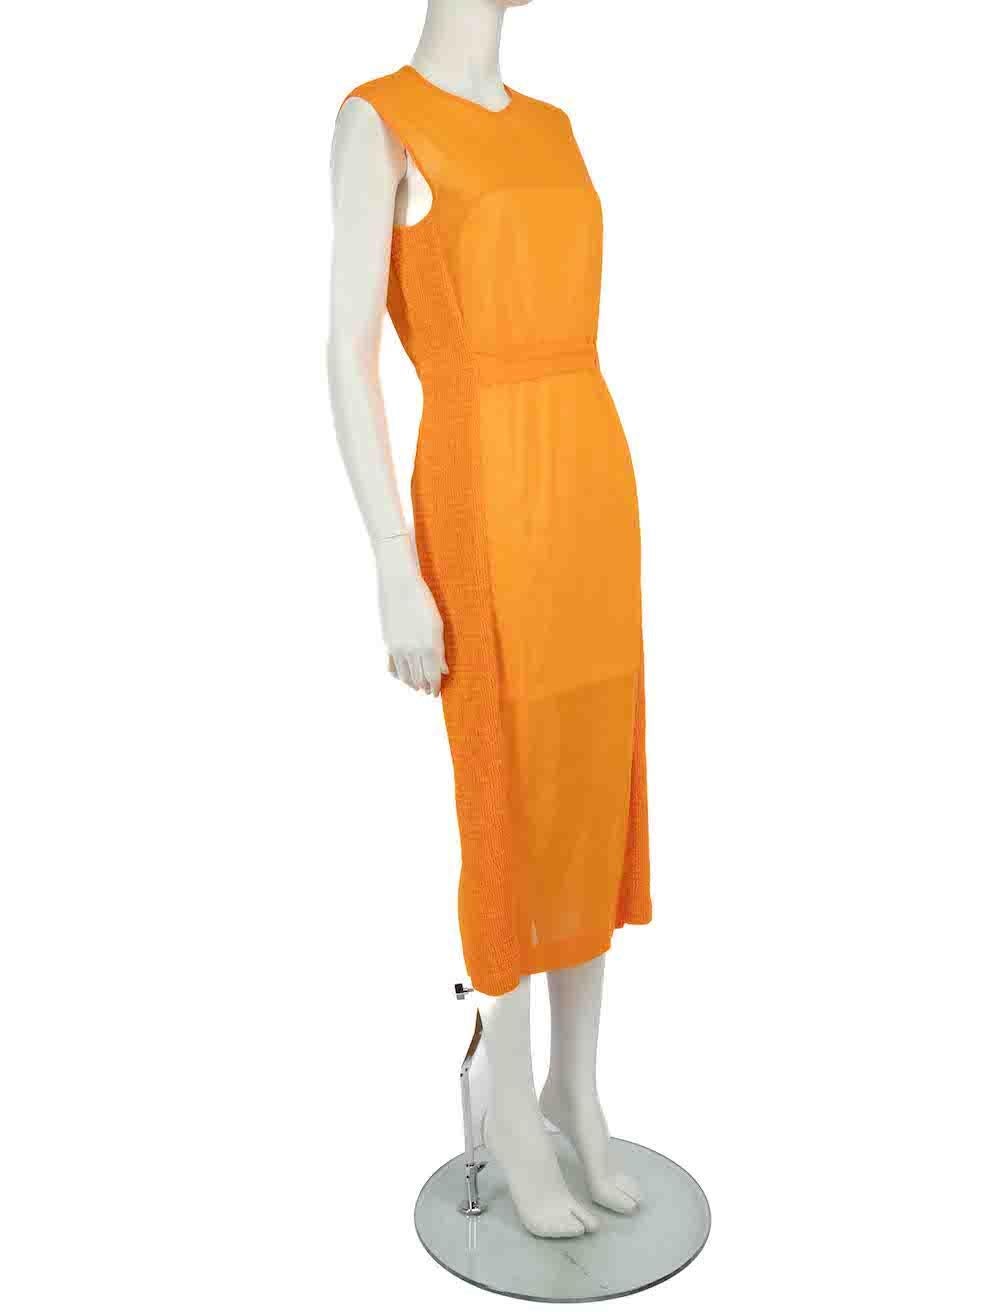 CONDITION is Very good. Minimal wear to dress is evident. Minimal wear to the right shoulder with a small mark on this used Sportmax designer resale item.
 
 
 
 Details
 
 
 Orange
 
 Cotton
 
 Dress
 
 Midi
 
 Sleeveless
 
 Round neck
 
 Smocked